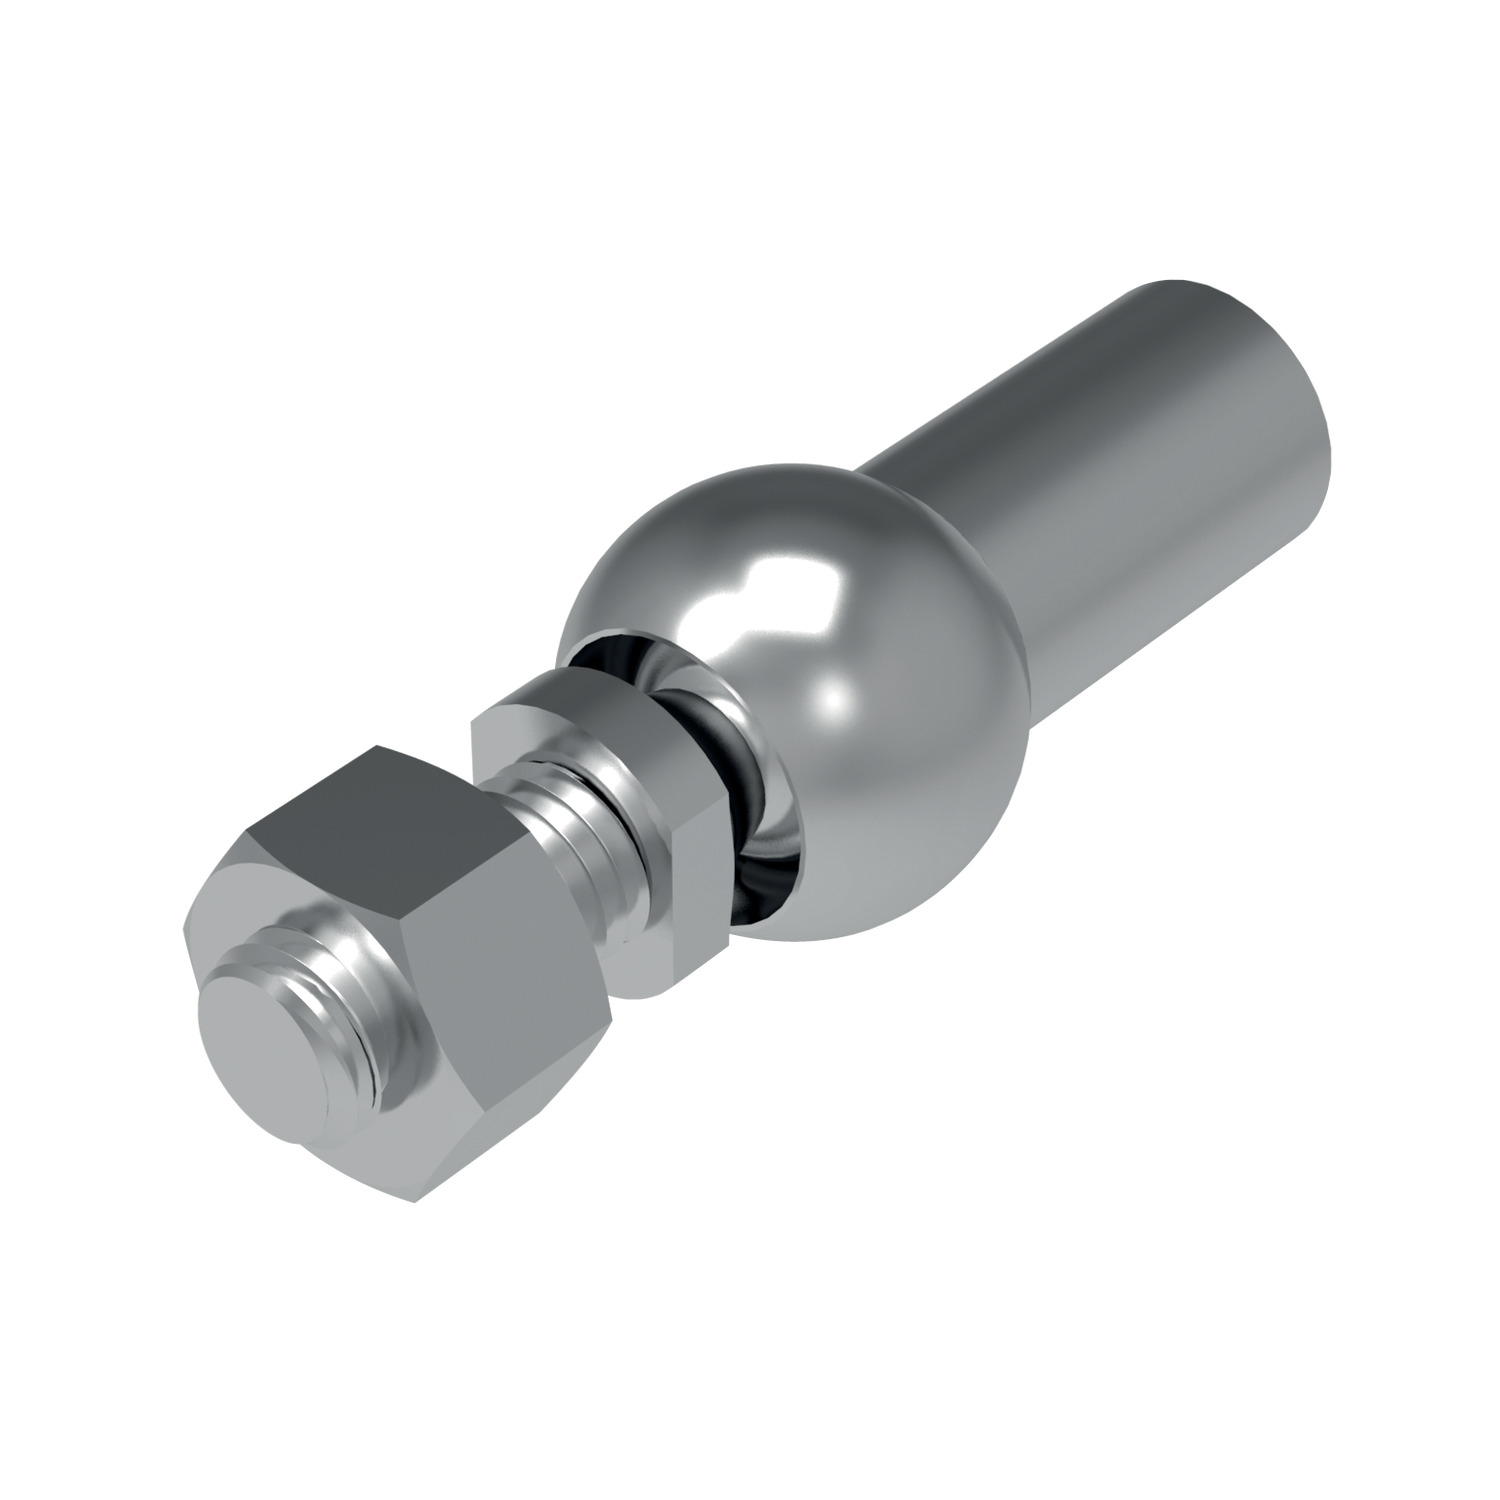 Stainless Axial Ball and Socket Joints In-line axial Stainless steel ball and socket joint. Also available in left hand thread (R3507).